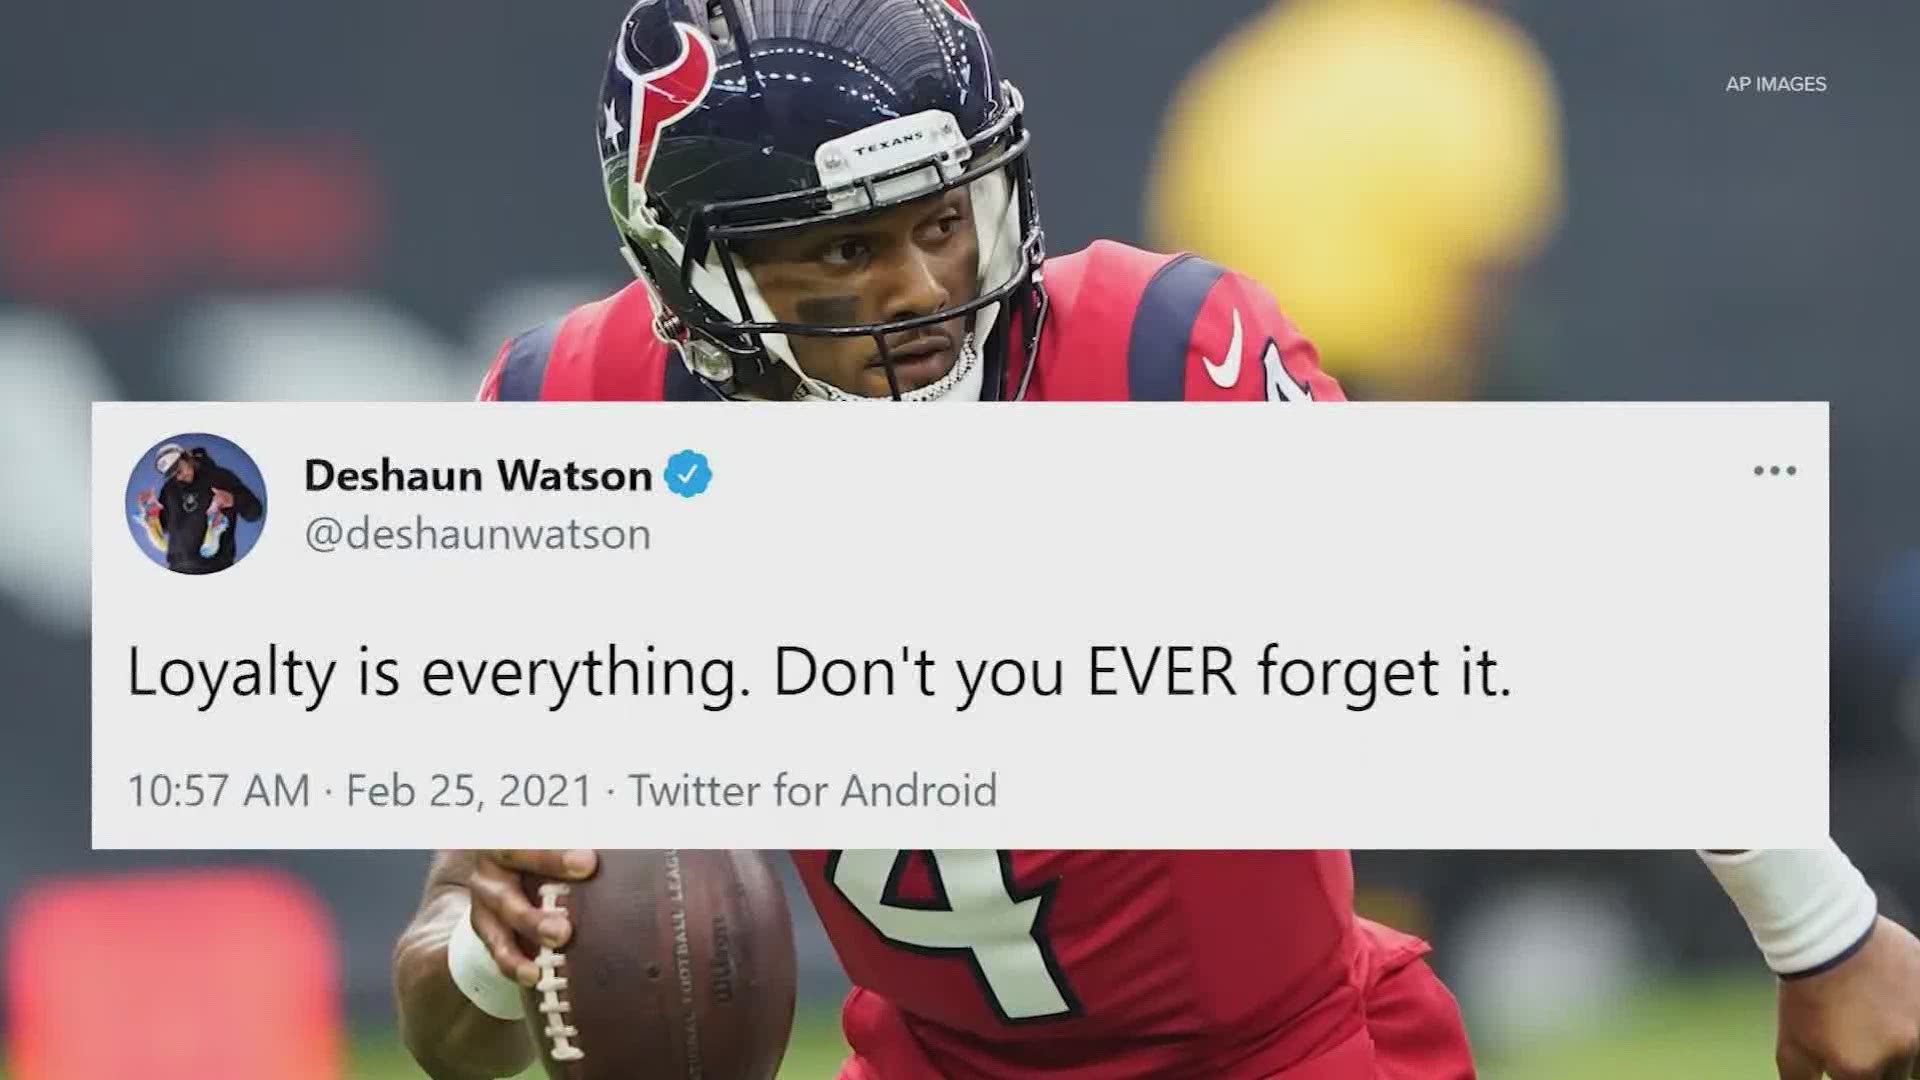 Deshaun Waston has met with new Texans head coach David Culley and said he will not play for the Texans, ESPN reports.